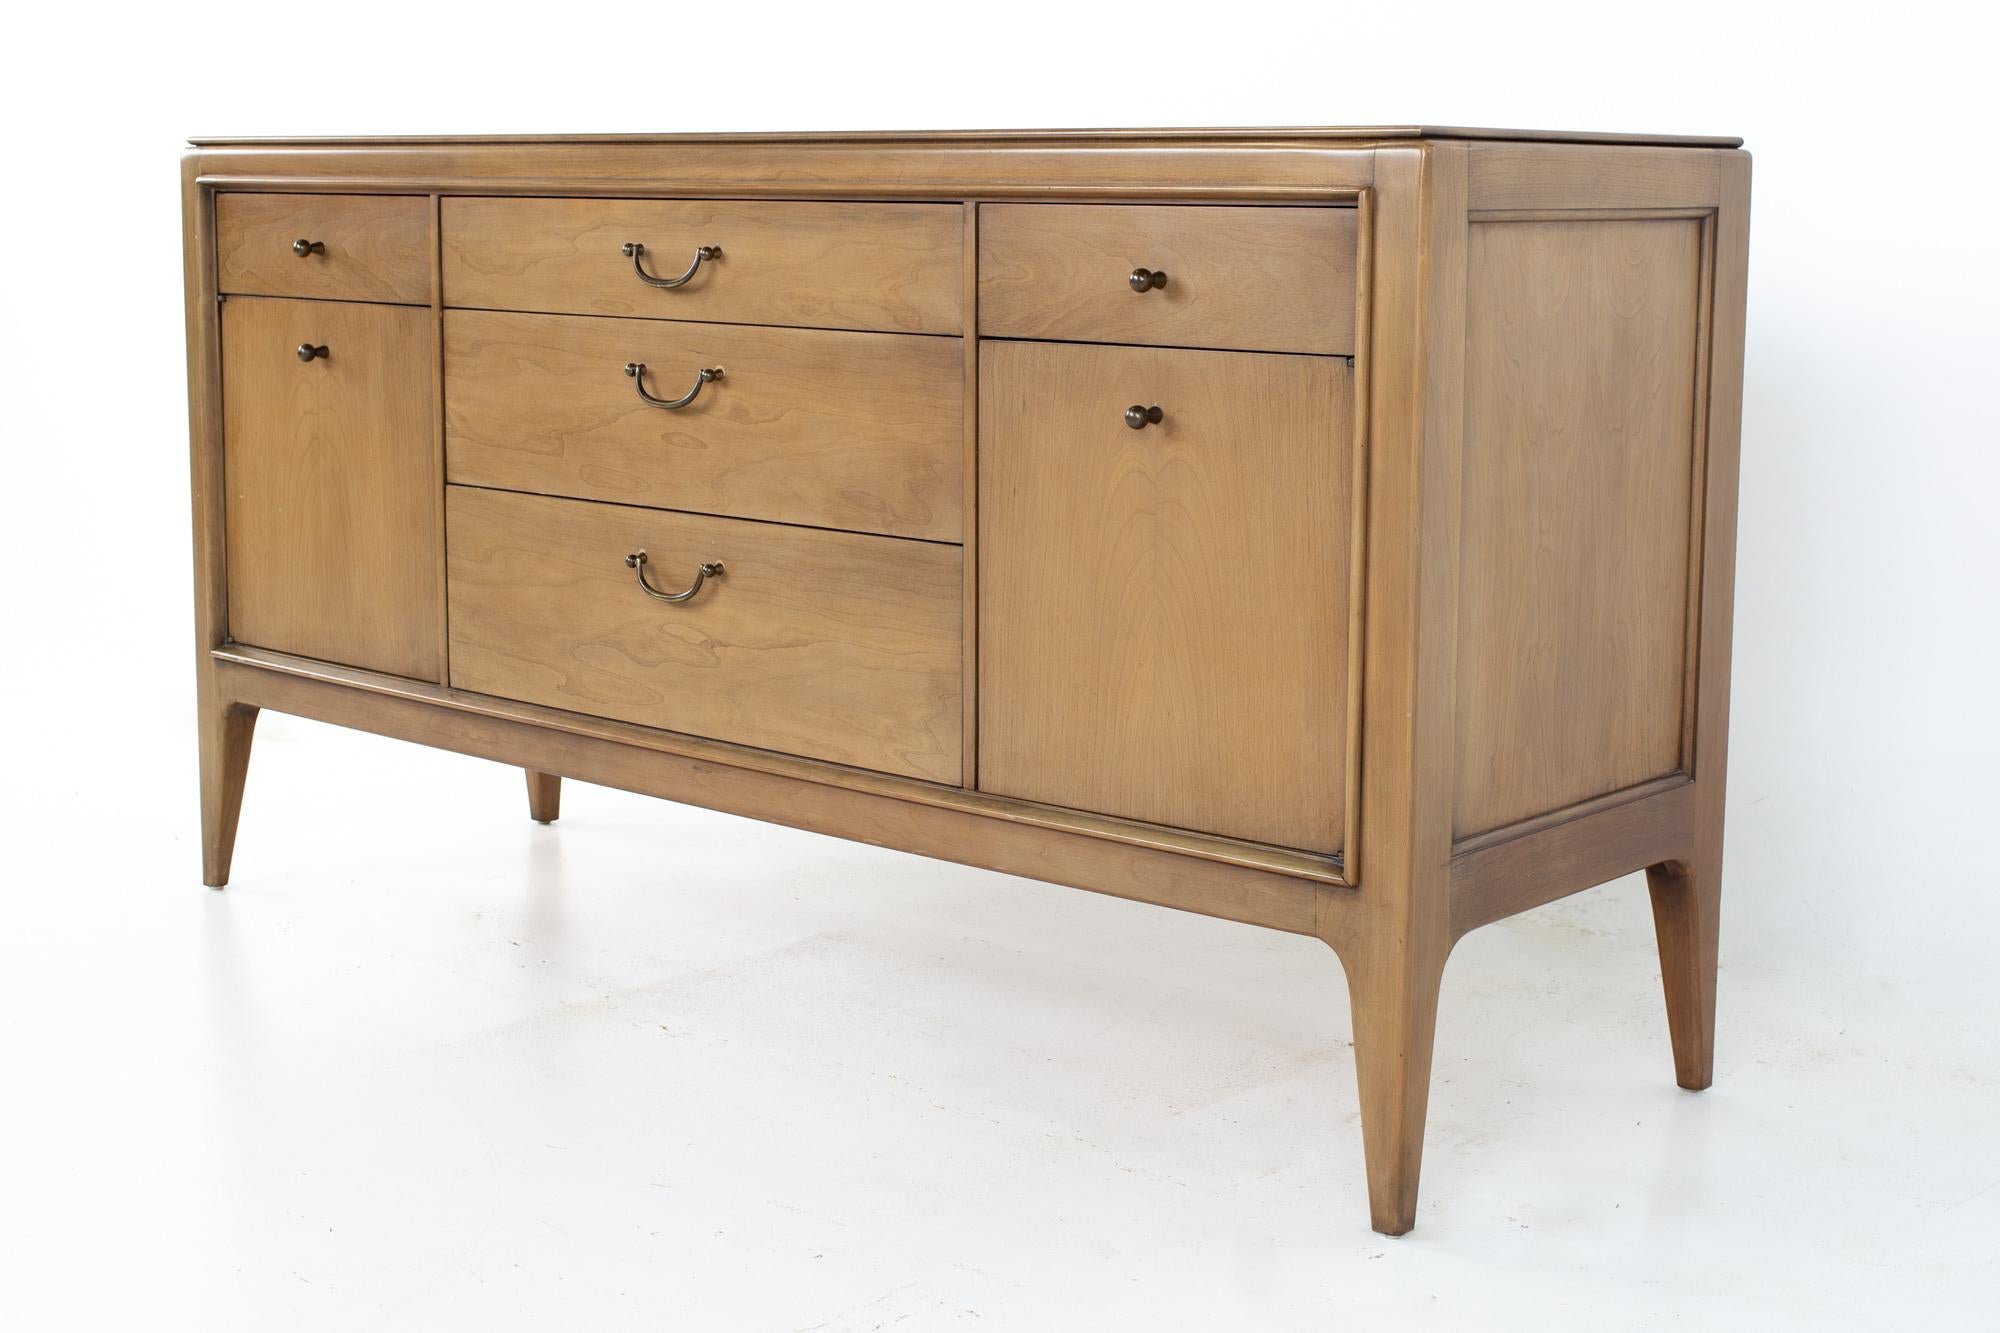 Century Furniture mid century walnut sideboard buffet credenza
Credenza measures: 62 wide x 19.75 deep x 32.25 inches high

All pieces of furniture can be had in what we call restored vintage condition. That means the piece is restored upon